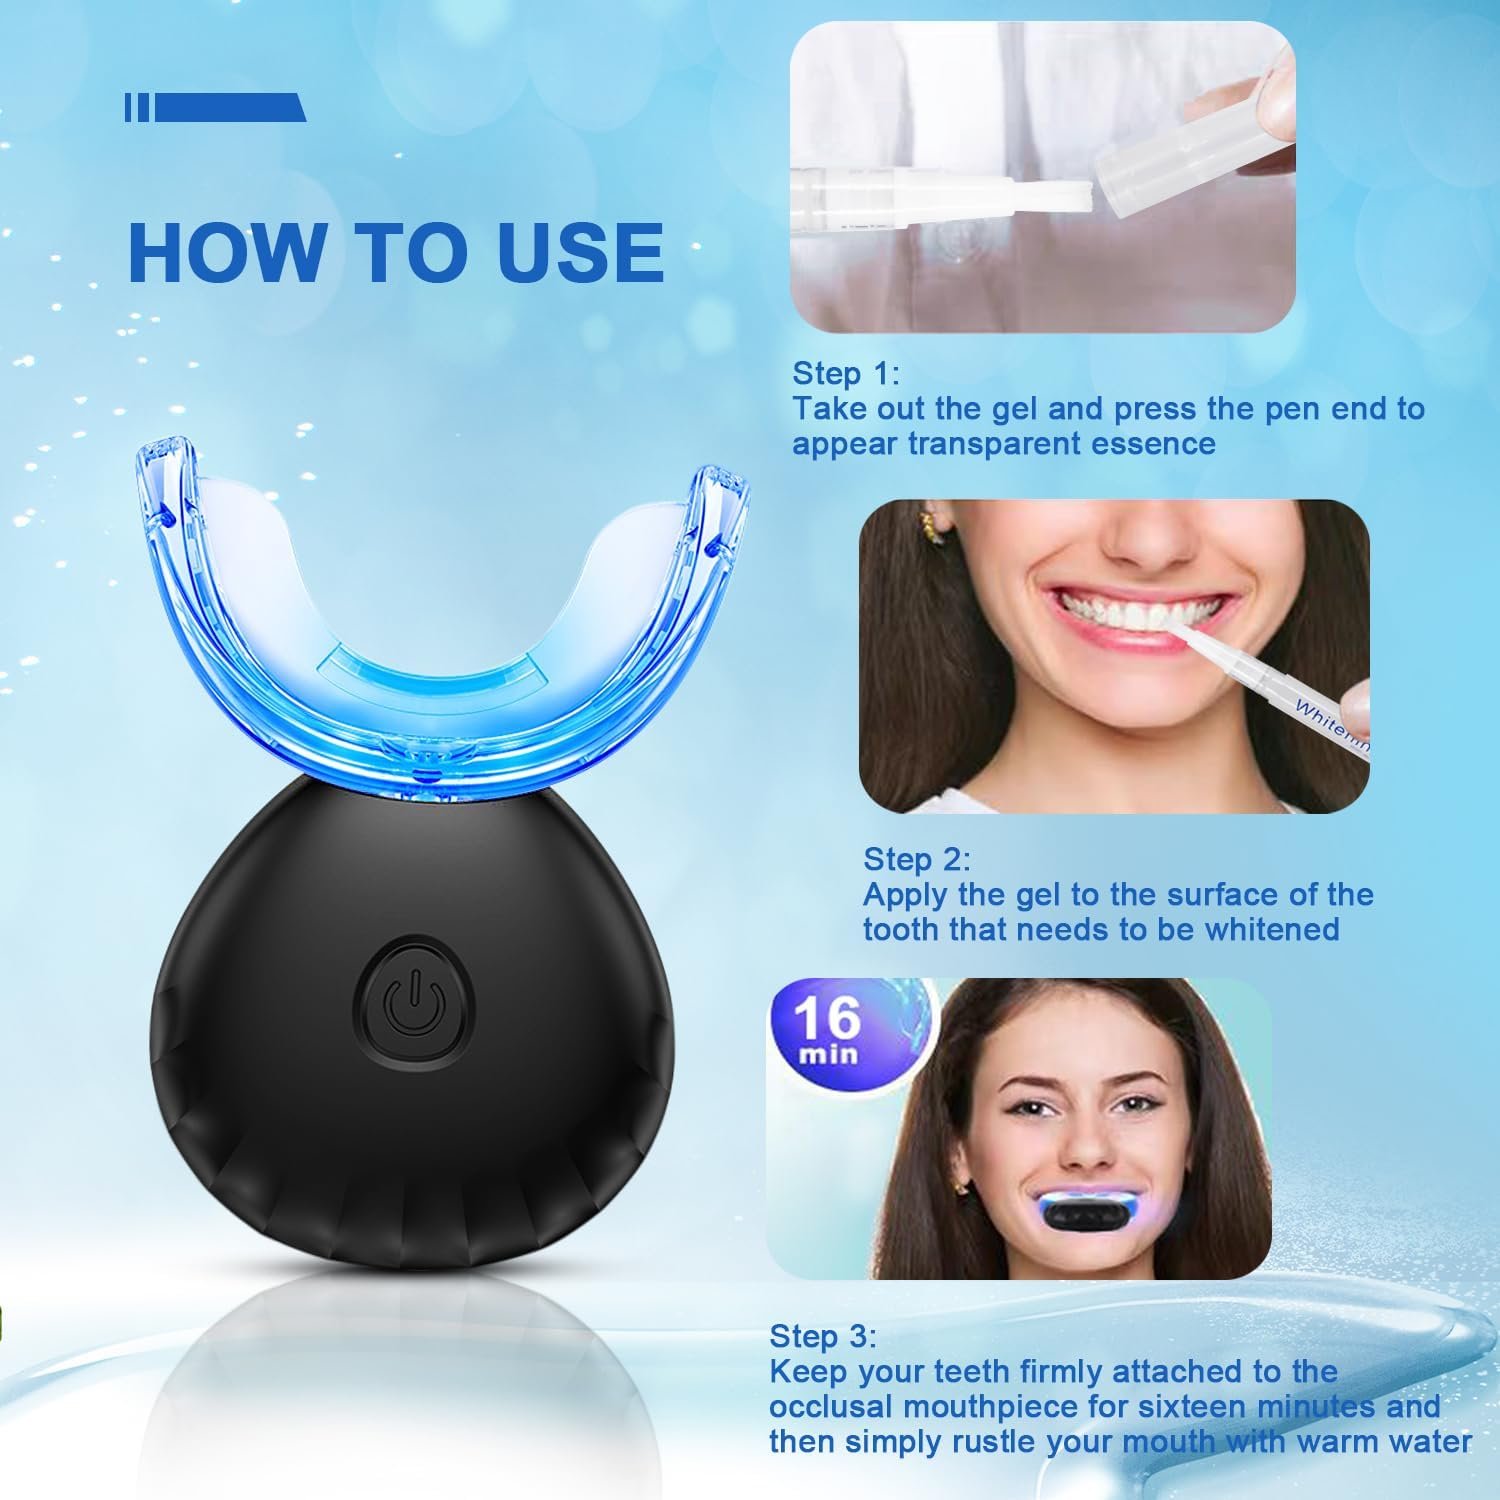 Teeth Whitening Kit with LED Light Teeth Whitening Gel Pen Mouth Tray, Hydrogen Carbamide Peroxide for Sensitive Teeth, LED Light Tooth Whitener, Teeth Stain Remover to Whiten Teeth